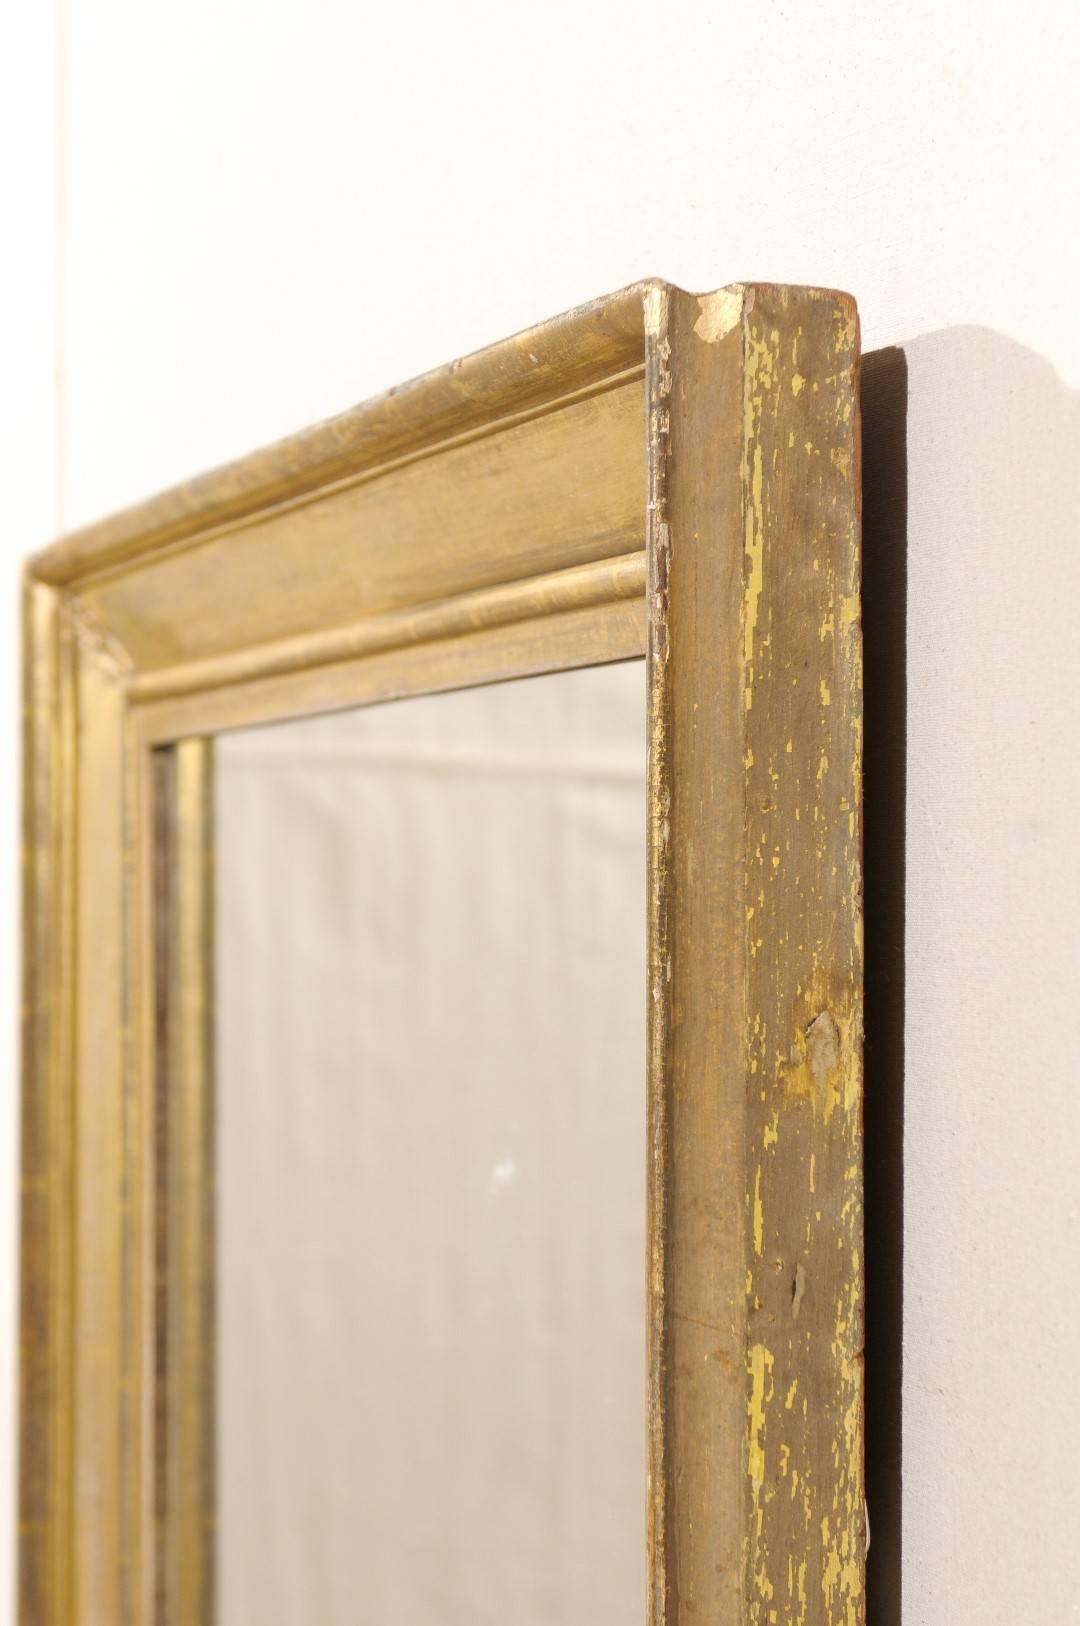 19th Century French Gilt Wood Mirror with Diagonal Leaf Motifs and Gold Color 1